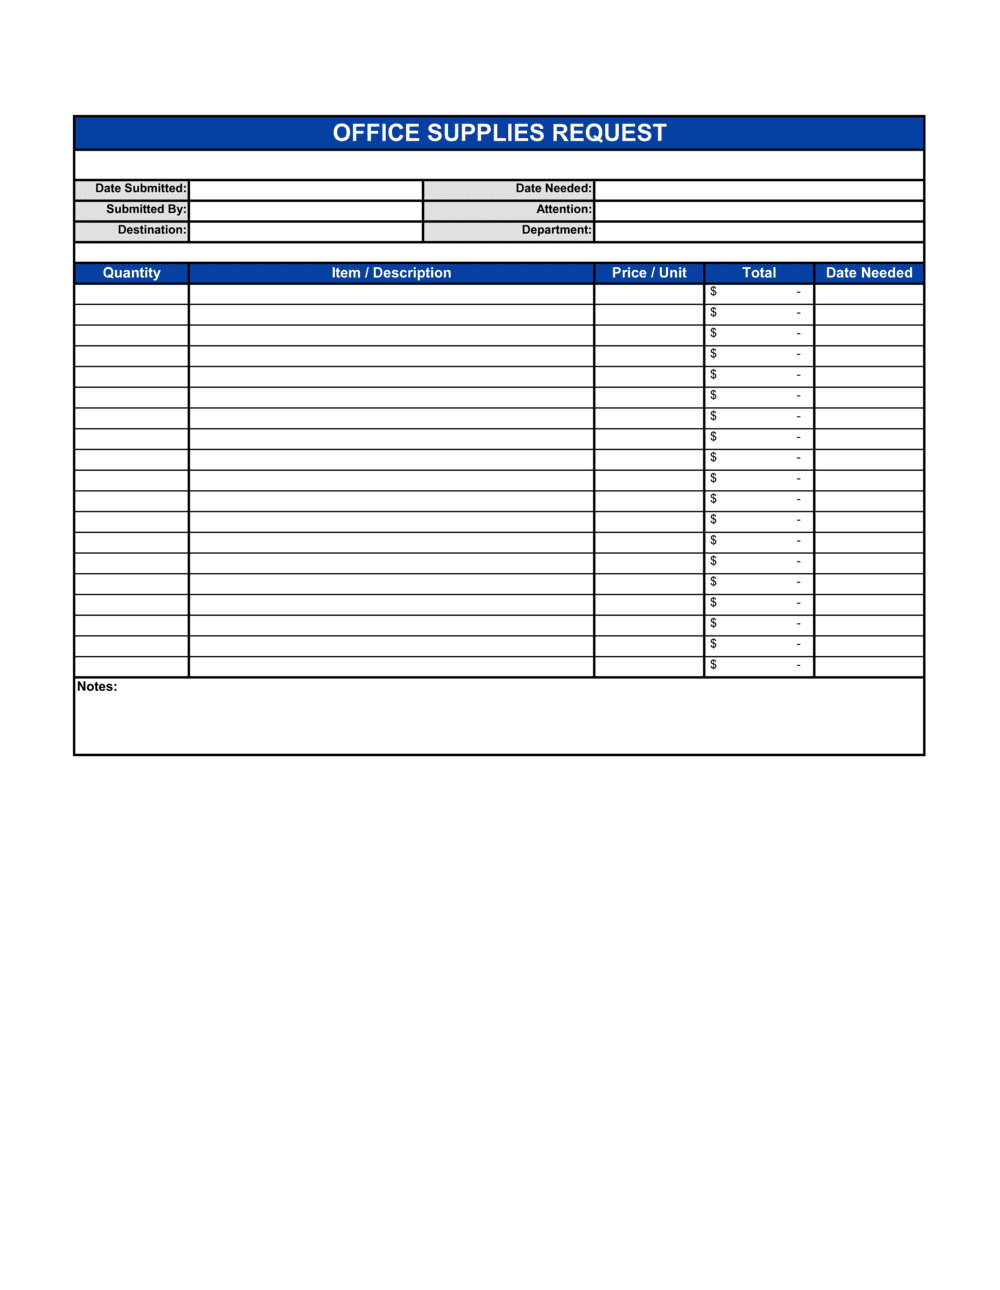 Office Supplies Request Template by BusinessinaBox™